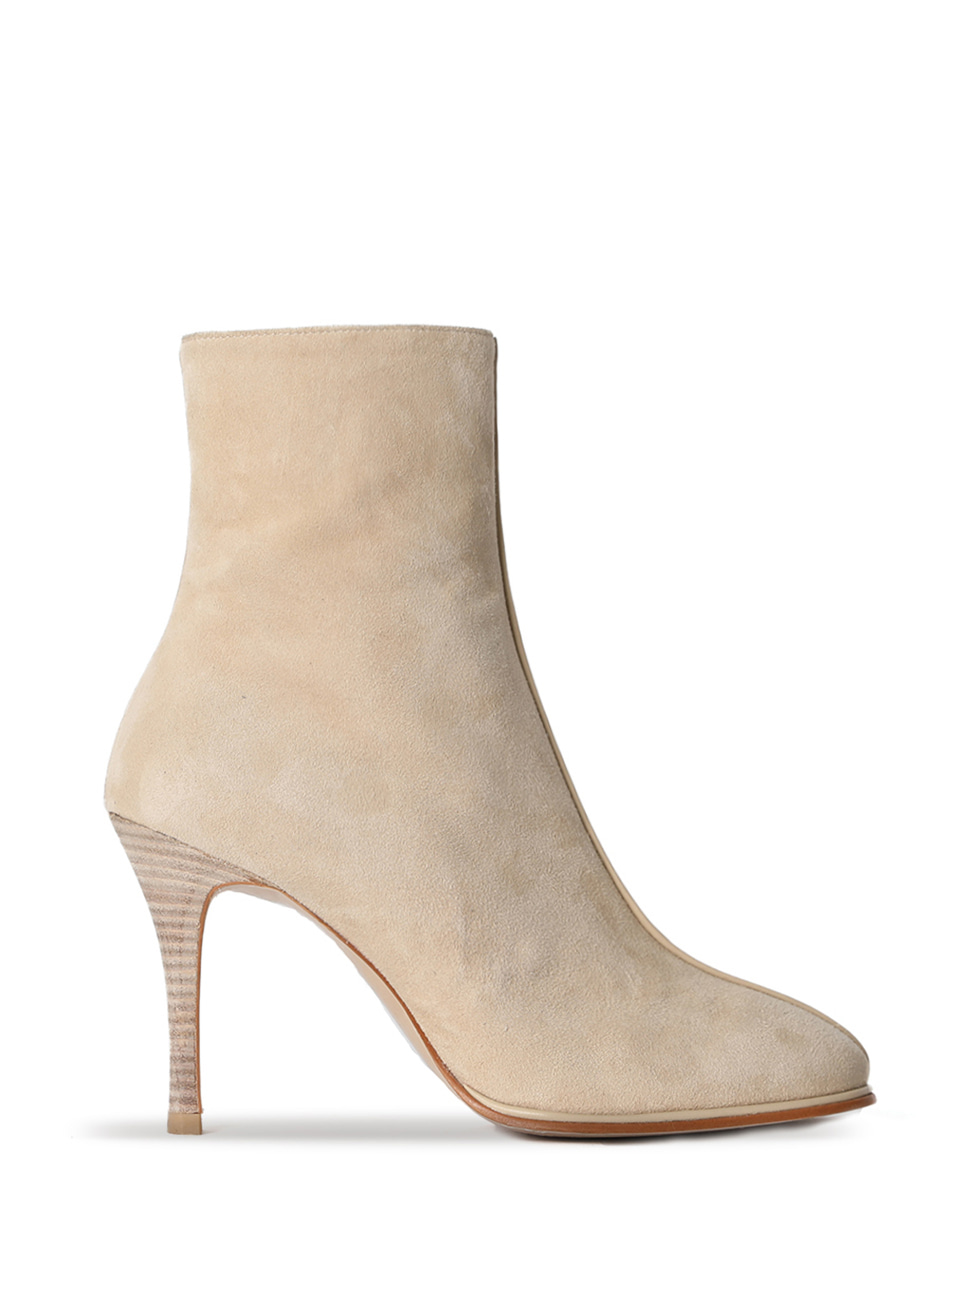 LINDA ANKLE BOOTS - BEIGE SUEDE